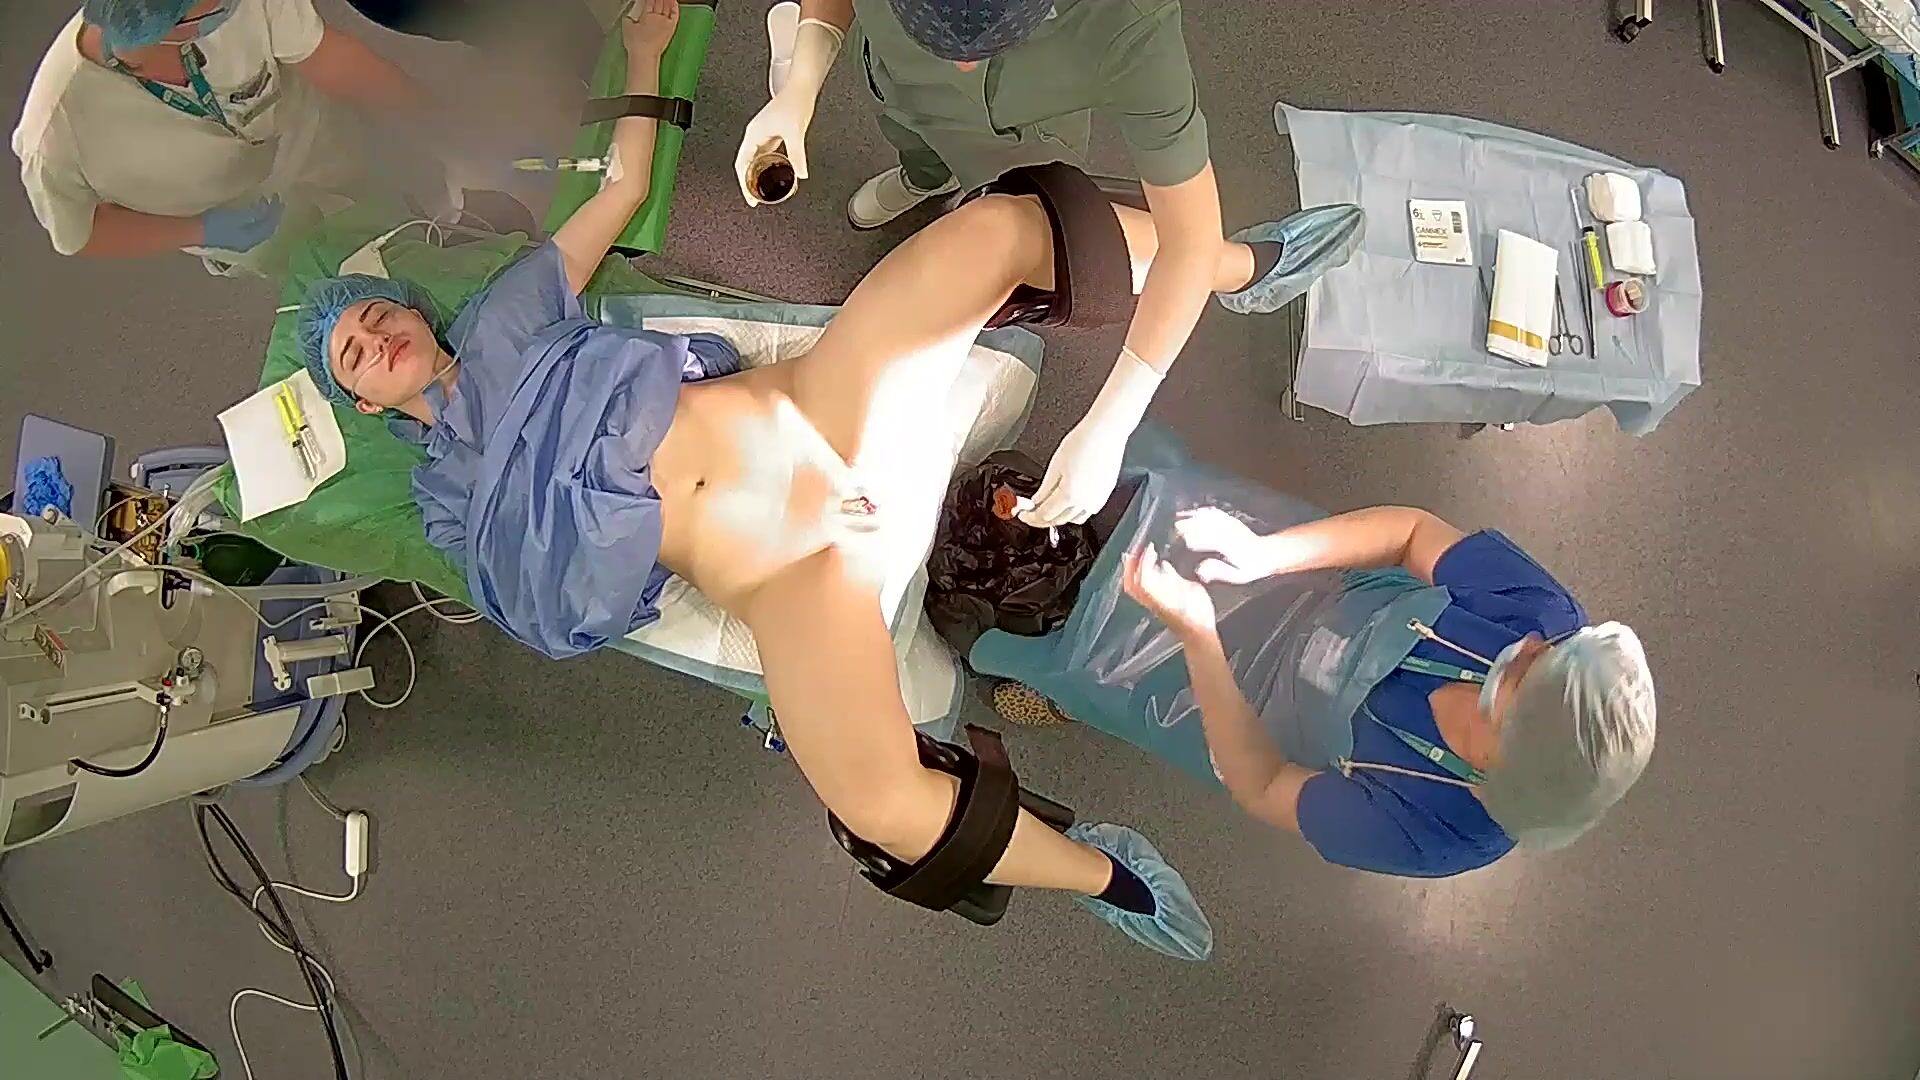 Gynecology operation 12 - Metadoll Cool Porn Leaks